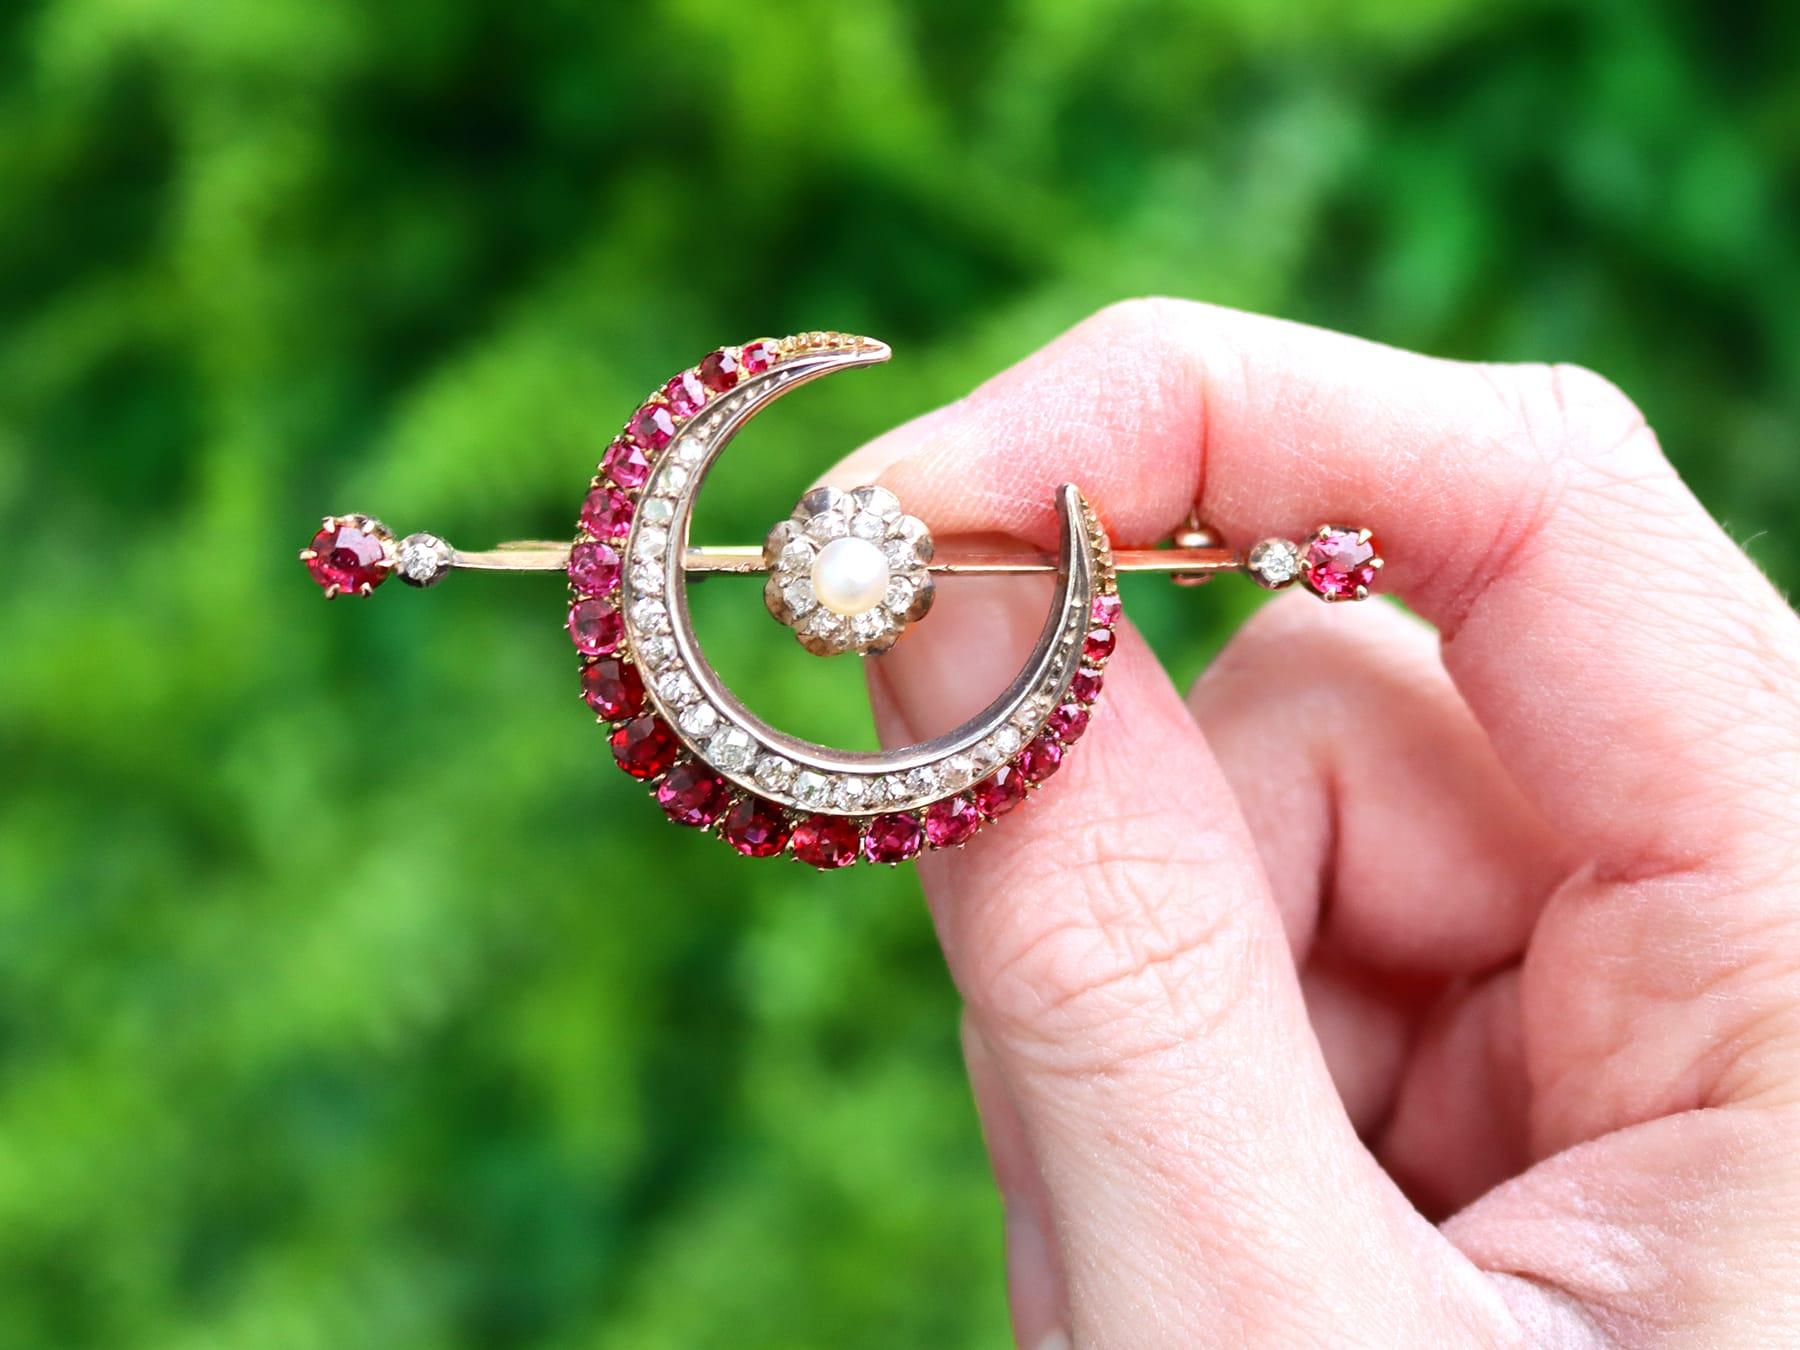 An exceptional, fine and impressive antique 2.85 carat natural ruby, 0.65 carat diamond and pearl, 9k yellow gold, silver set crescent, bar style brooch; part of the antique jewelry / estate jewelry collections.

This antique crescent brooch has